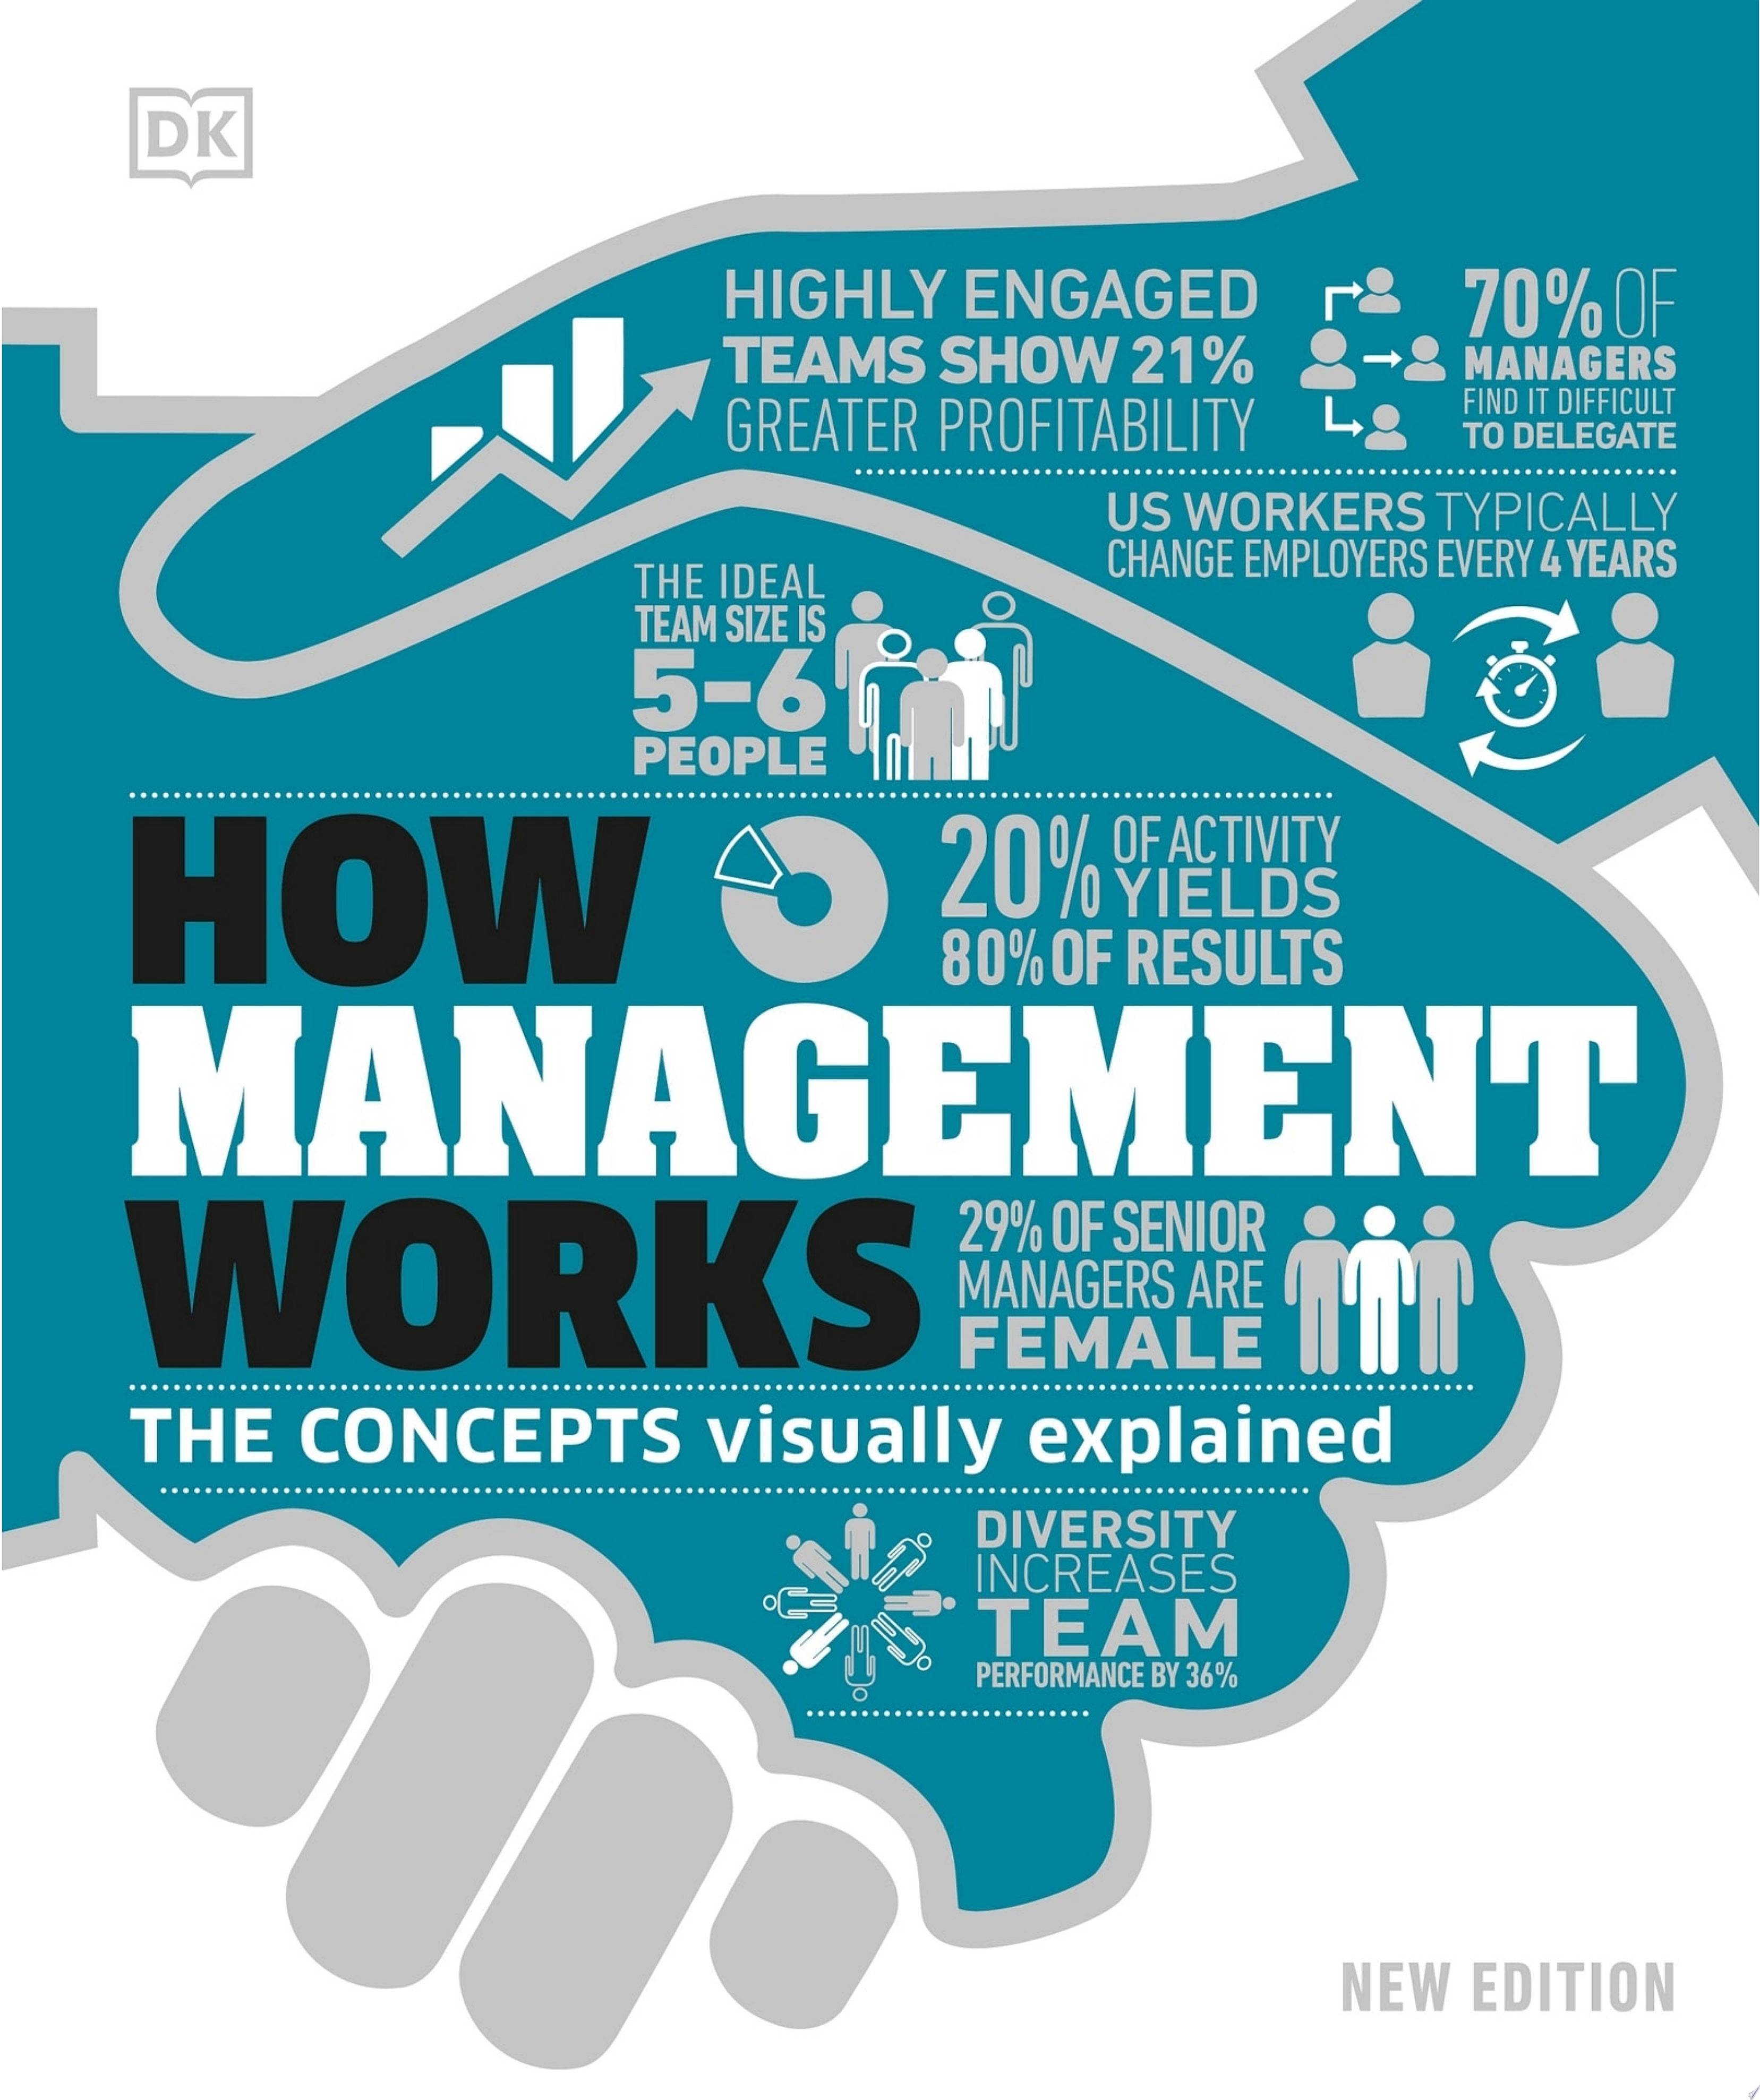 Image for "How Management Works"